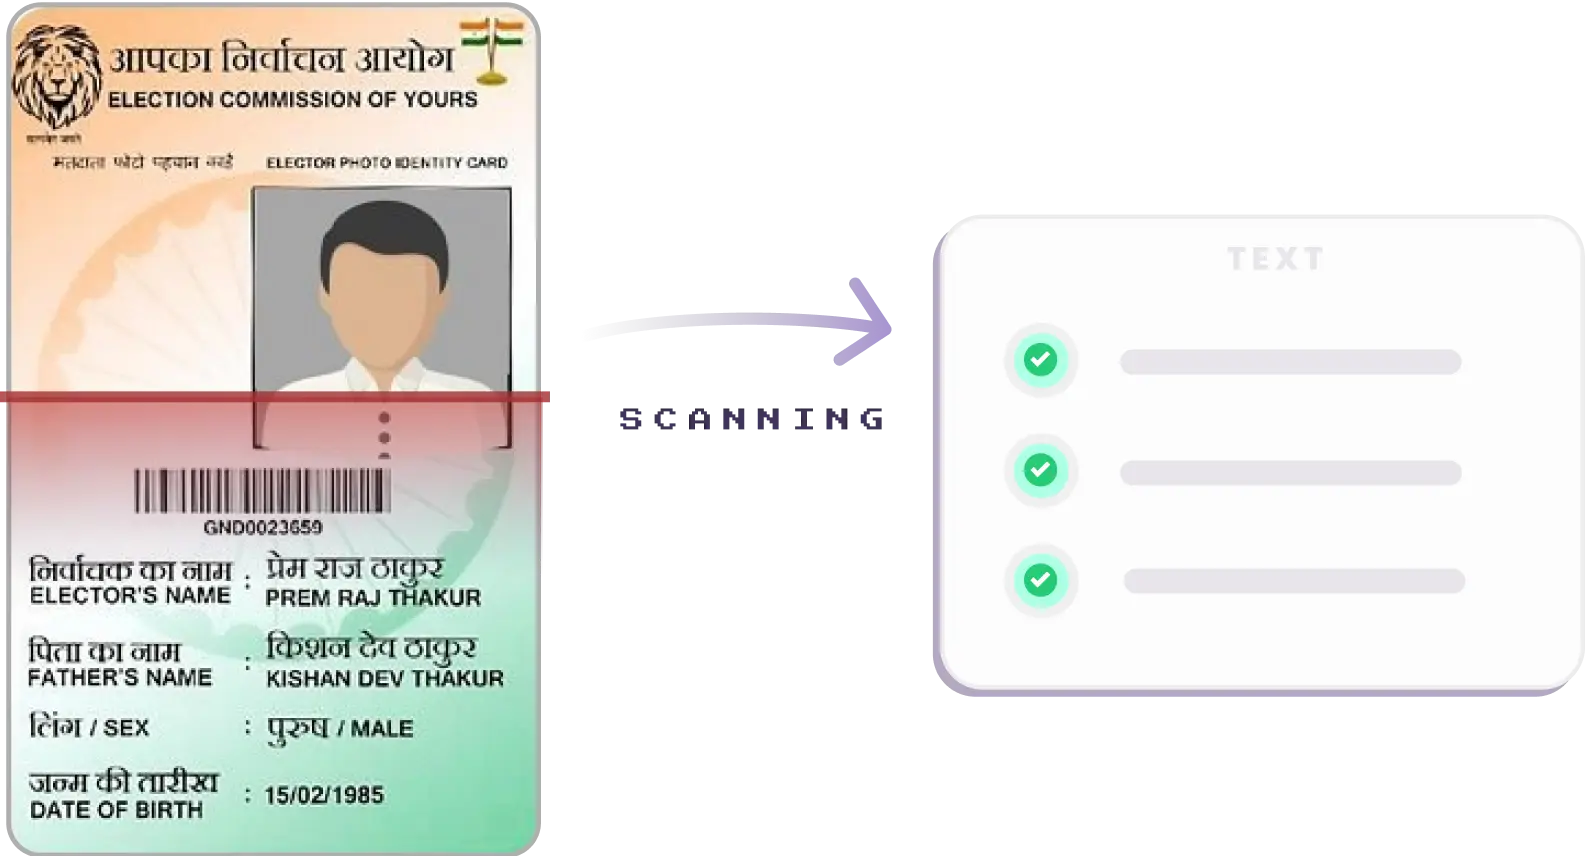 An Indian election photo identity card with the holder's information on the left and a checklist with check marks on the right.